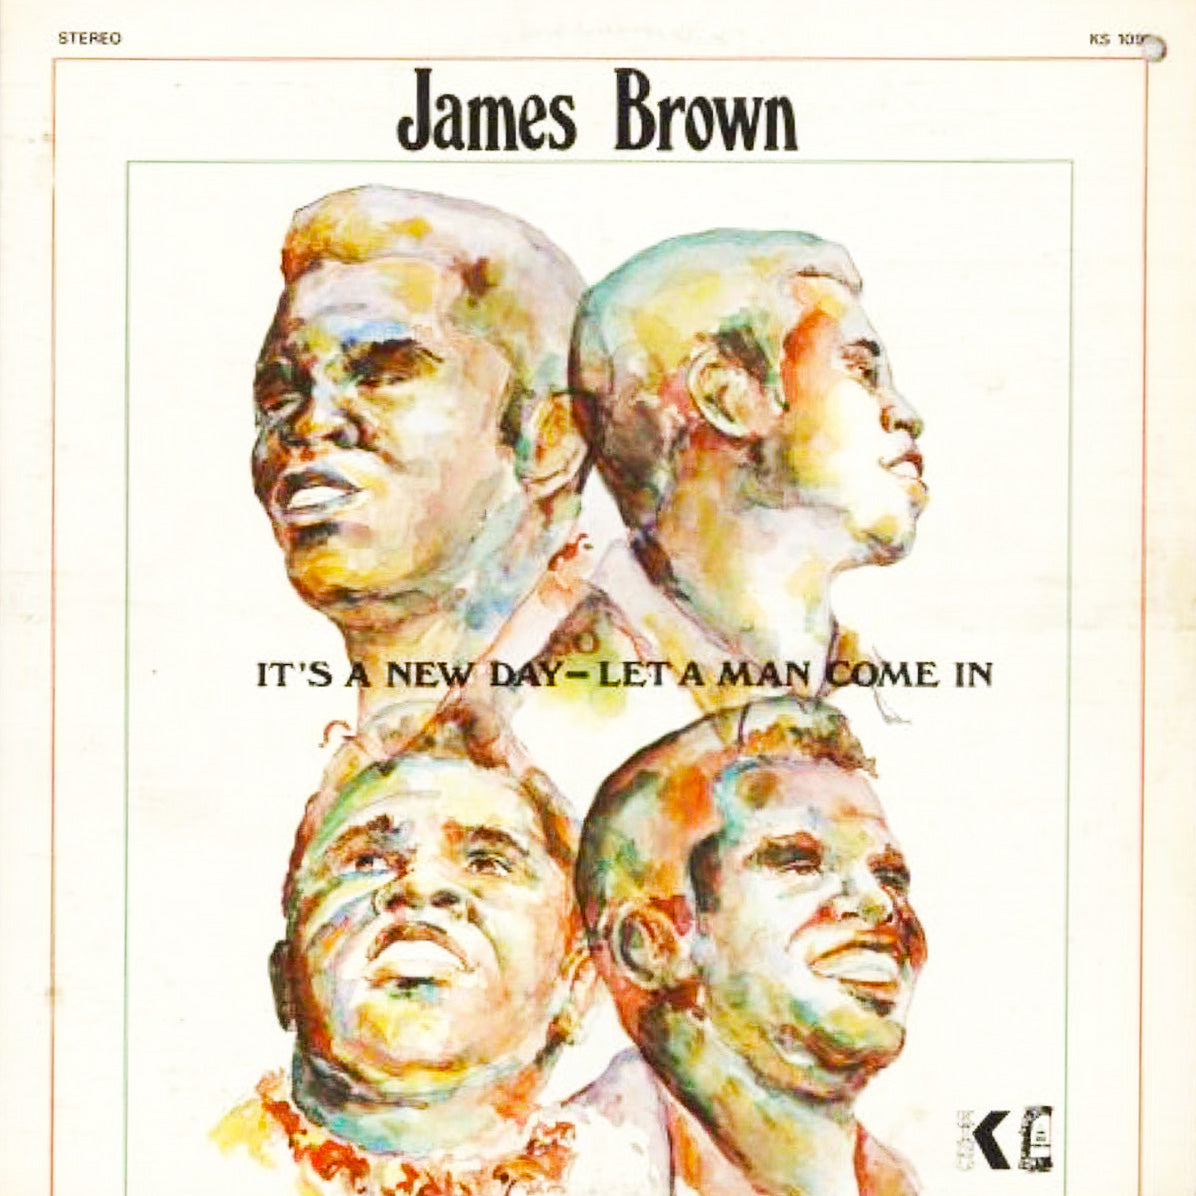 BROWN, JAMES – It's A New Day So Let A Man Come In